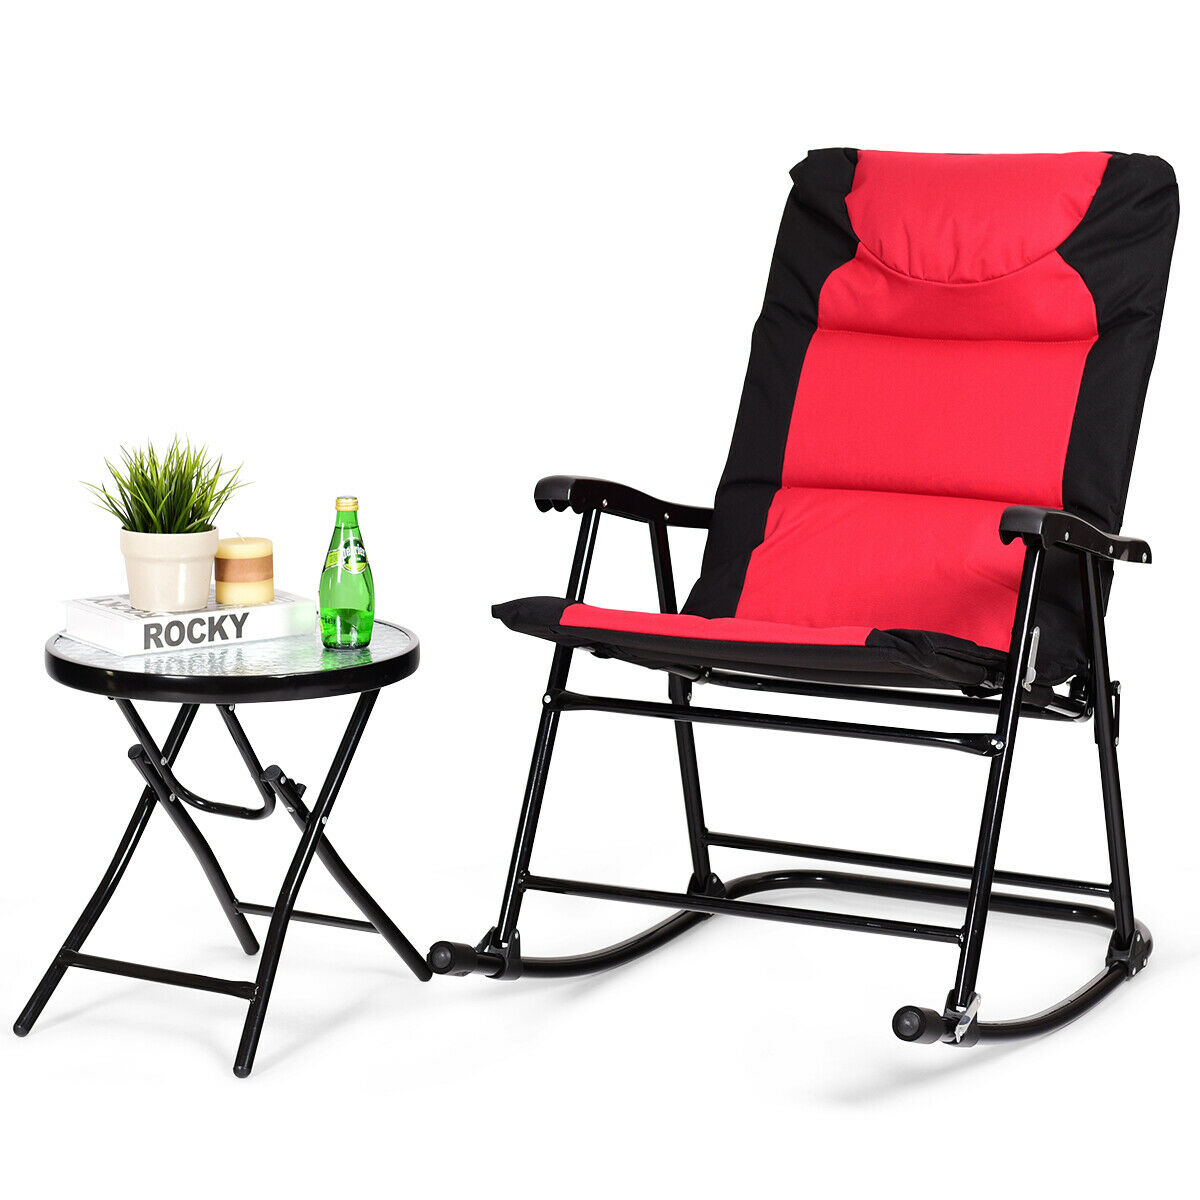 3 Pcs Folding Bistro Set Outdoor Rocking Chairs and Table Set-Red